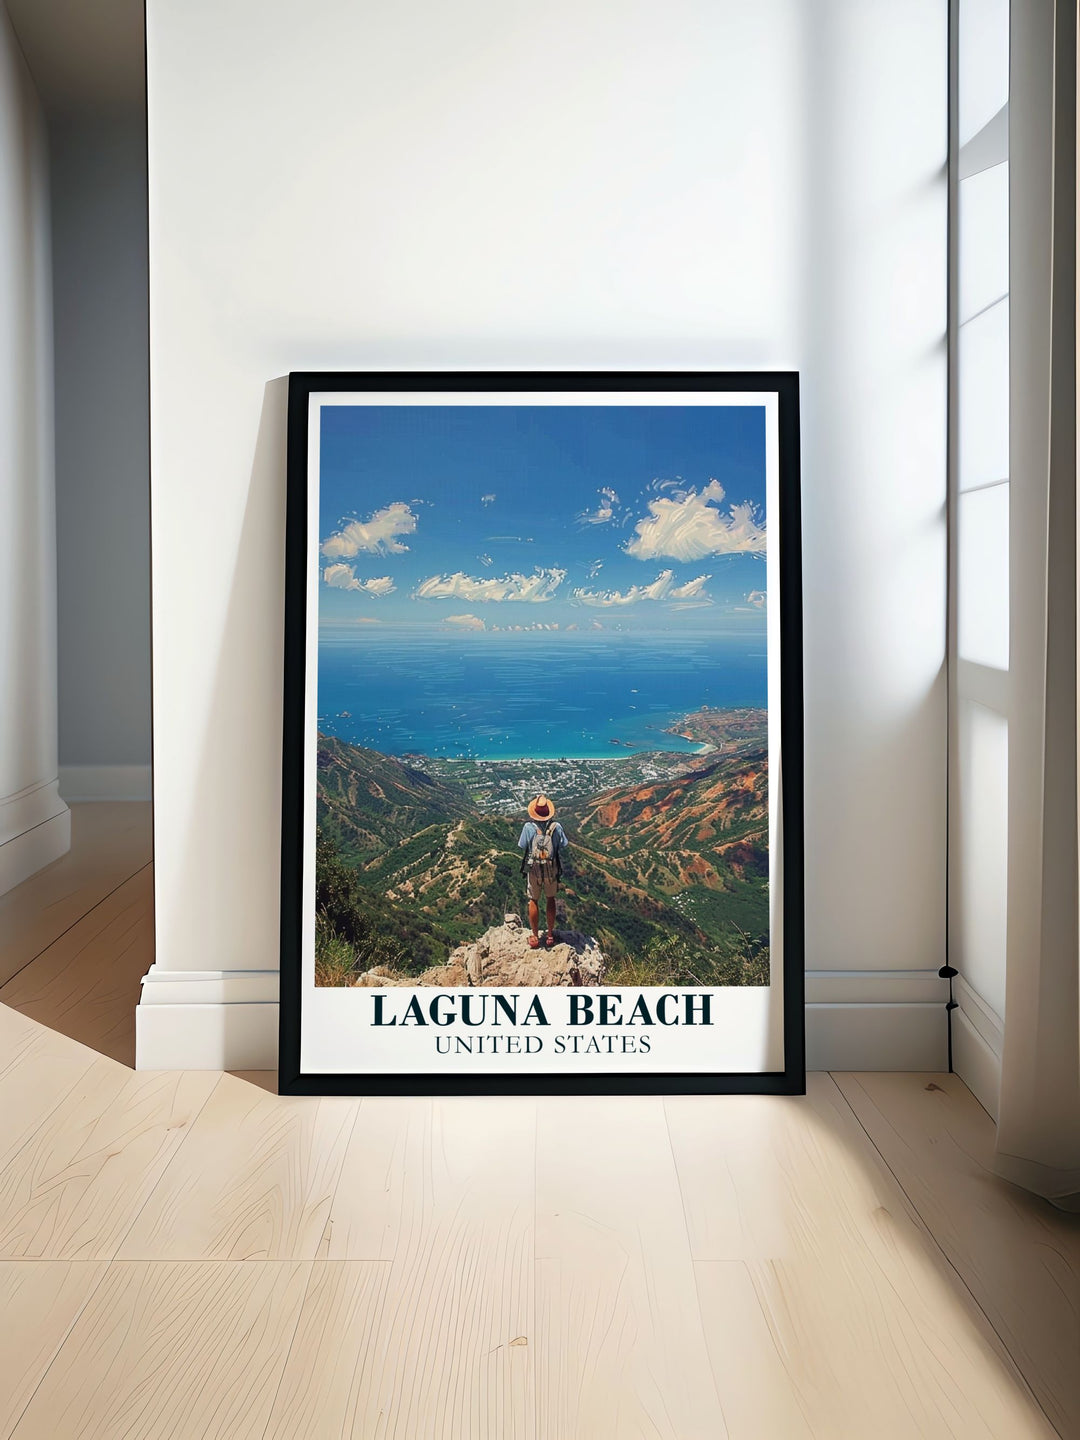 Laguna Beach Print featuring Top of the World showcases vibrant colors and intricate details perfect for adding a touch of coastal charm to your home decor ideal for living room or bedroom wall art.